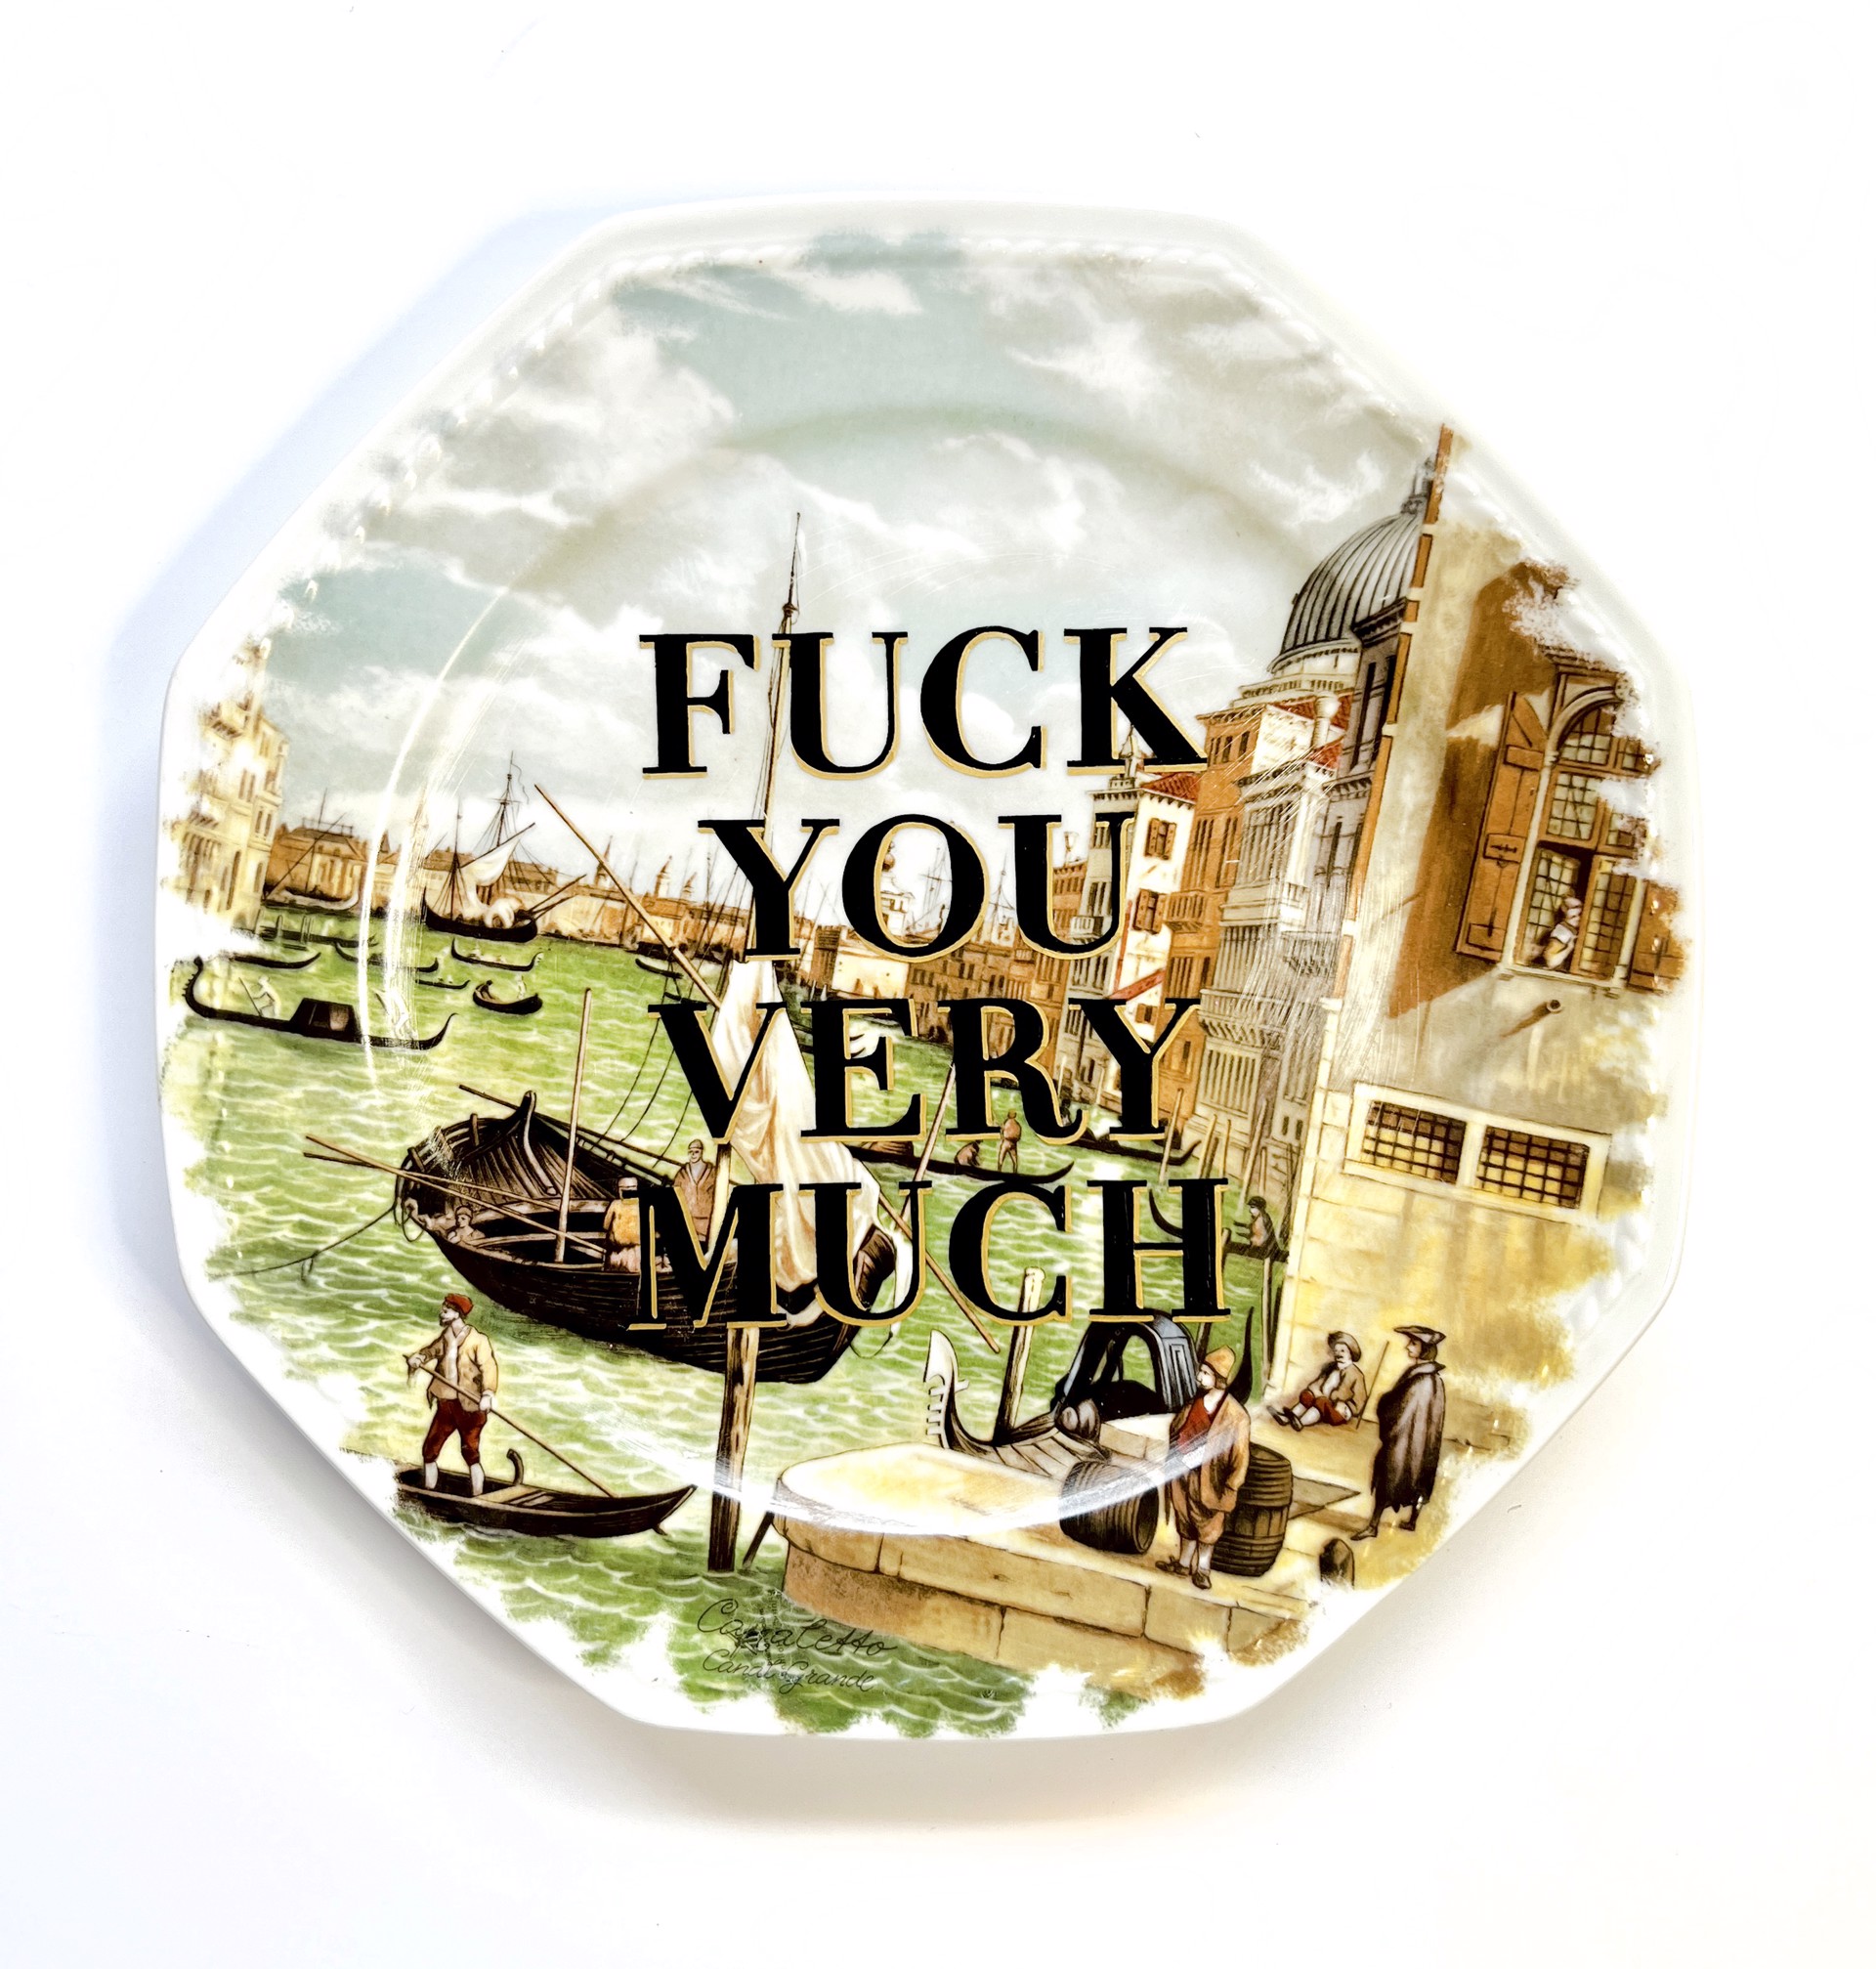 Fuck you very much (dinner plate) by Marie-Claude Marquis